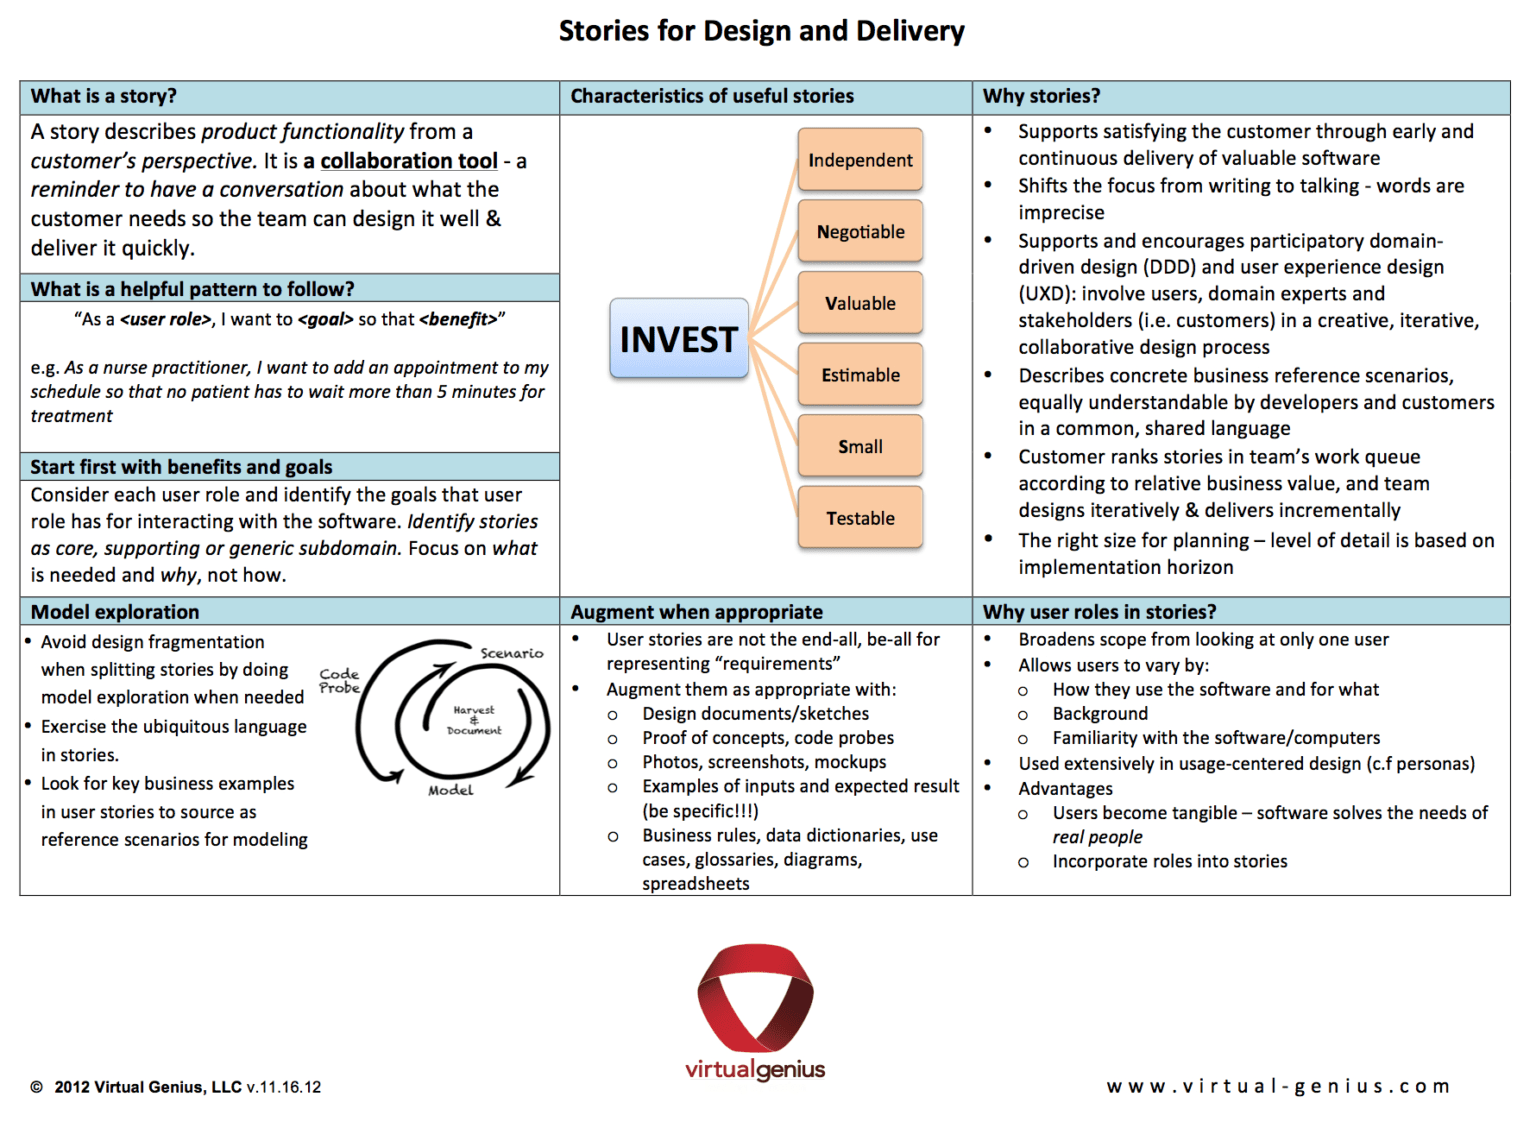 agile-user-stories-and-domain-driven-design-ddd-in-user-story